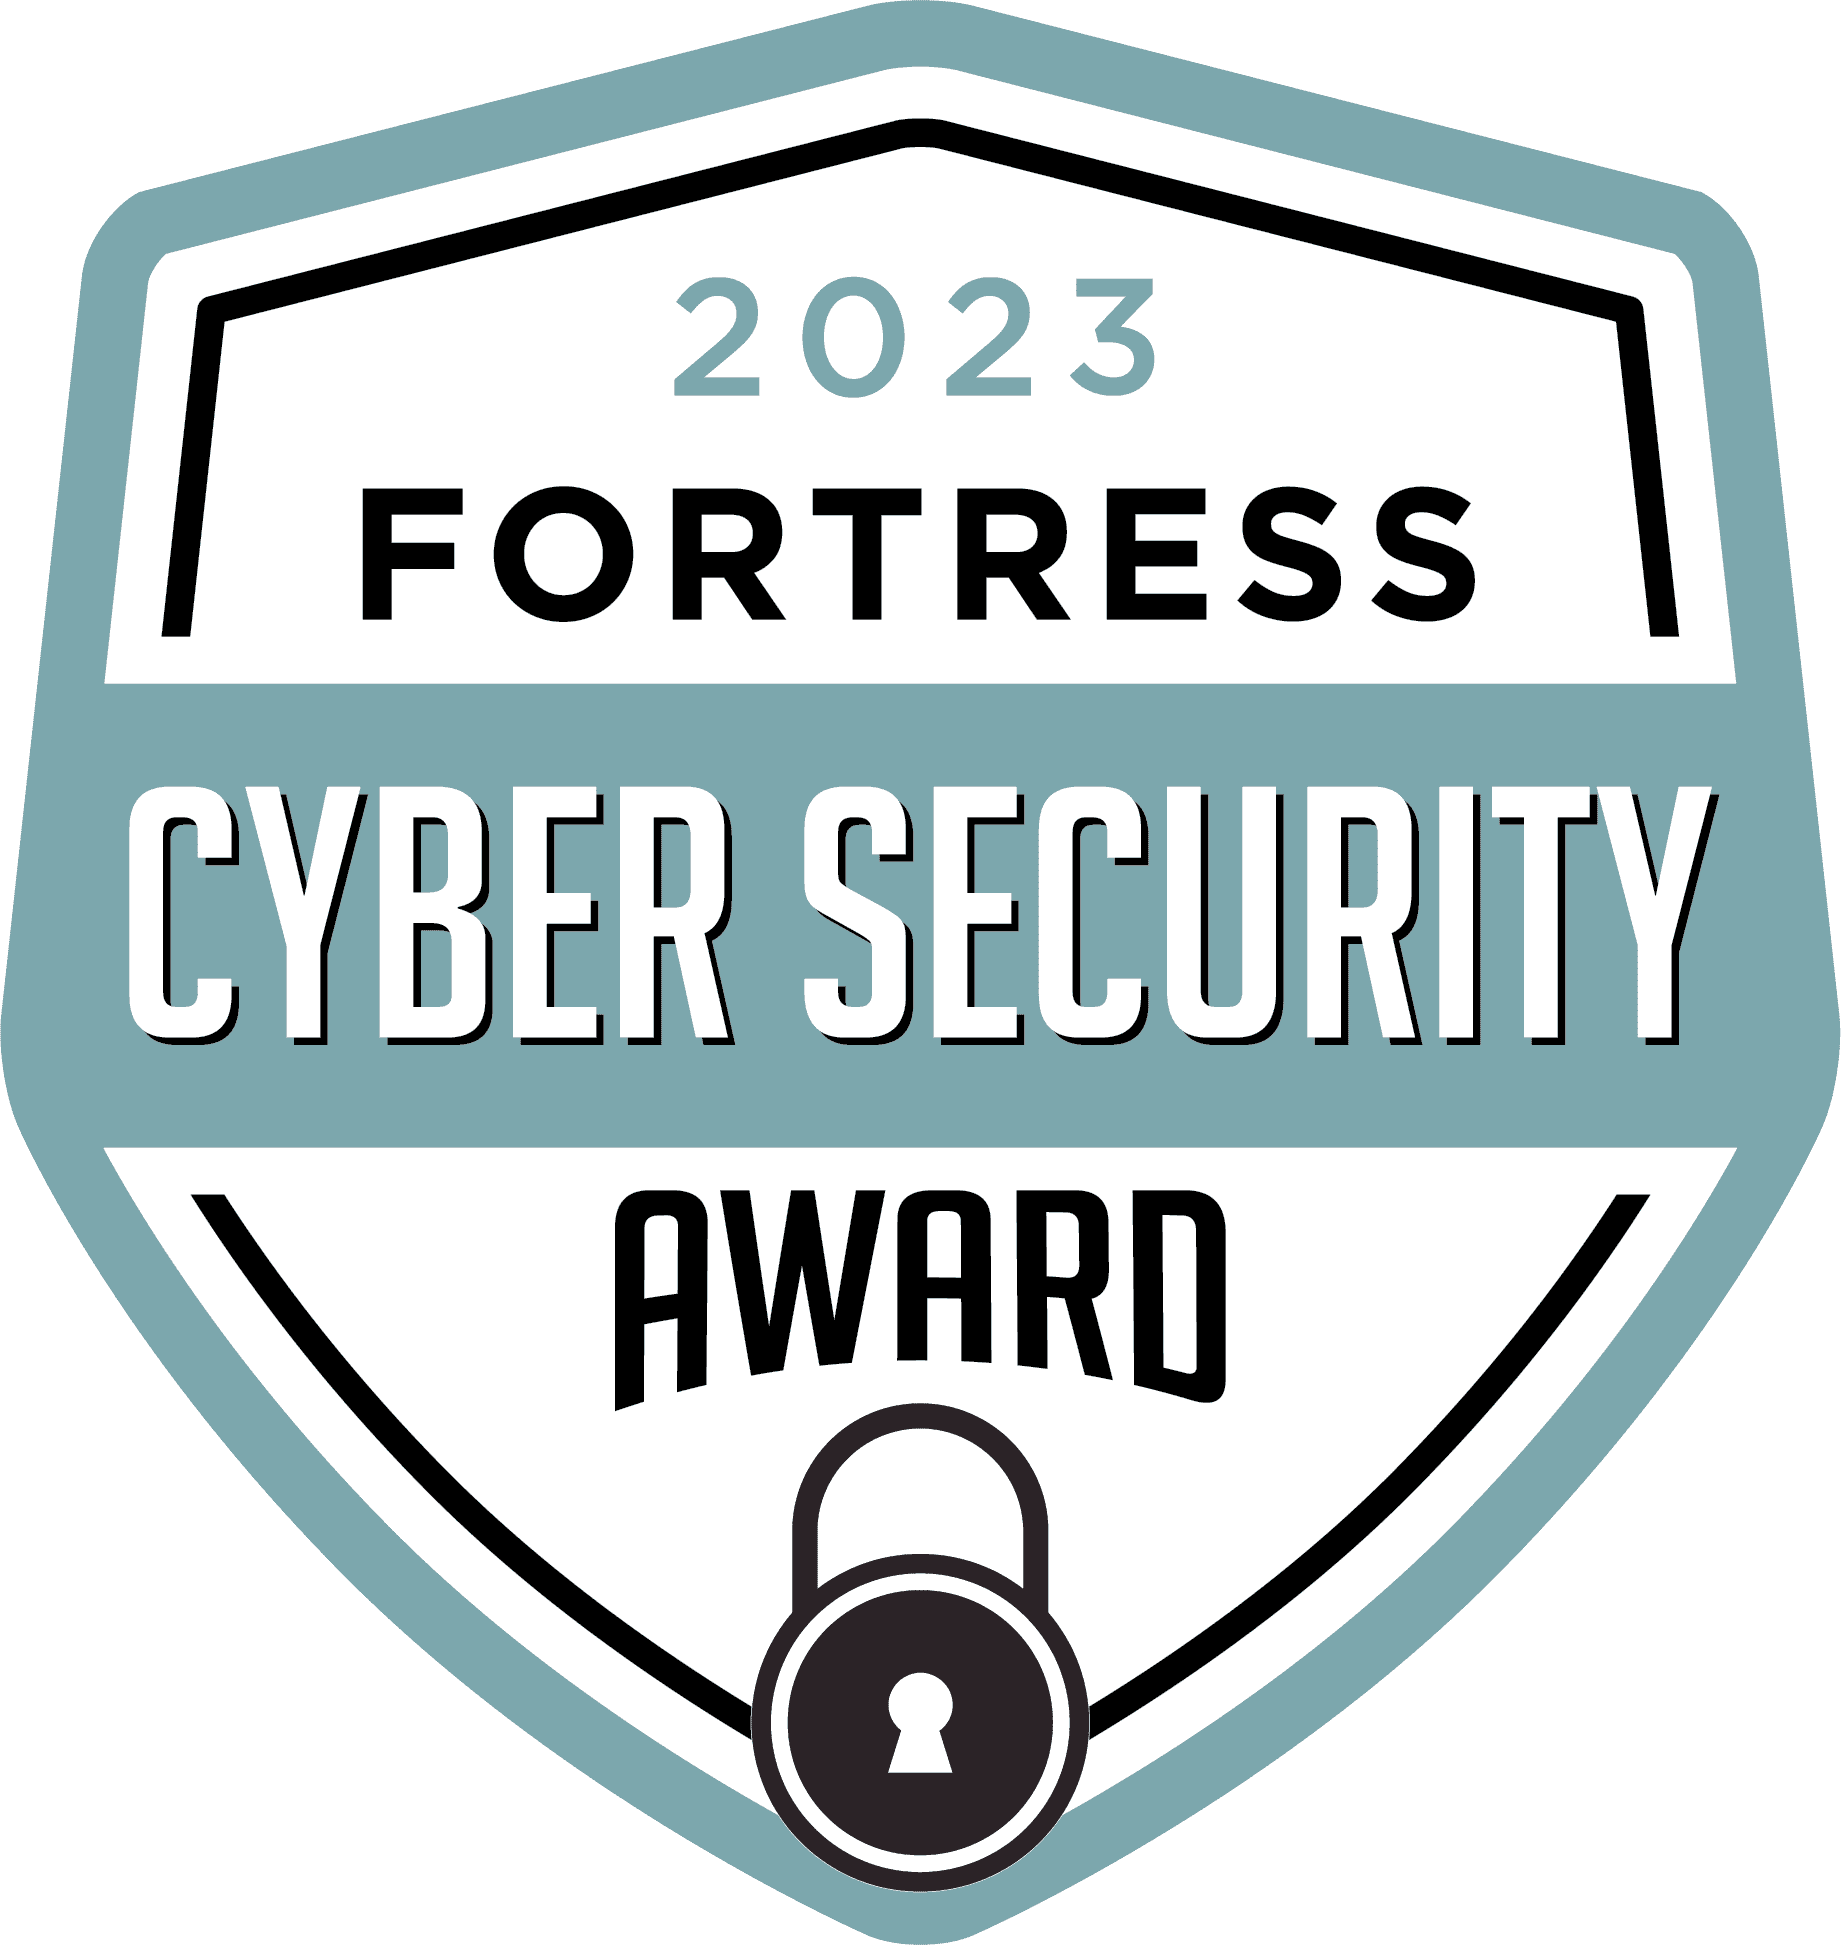 Fortress Cyber Security Award 2023